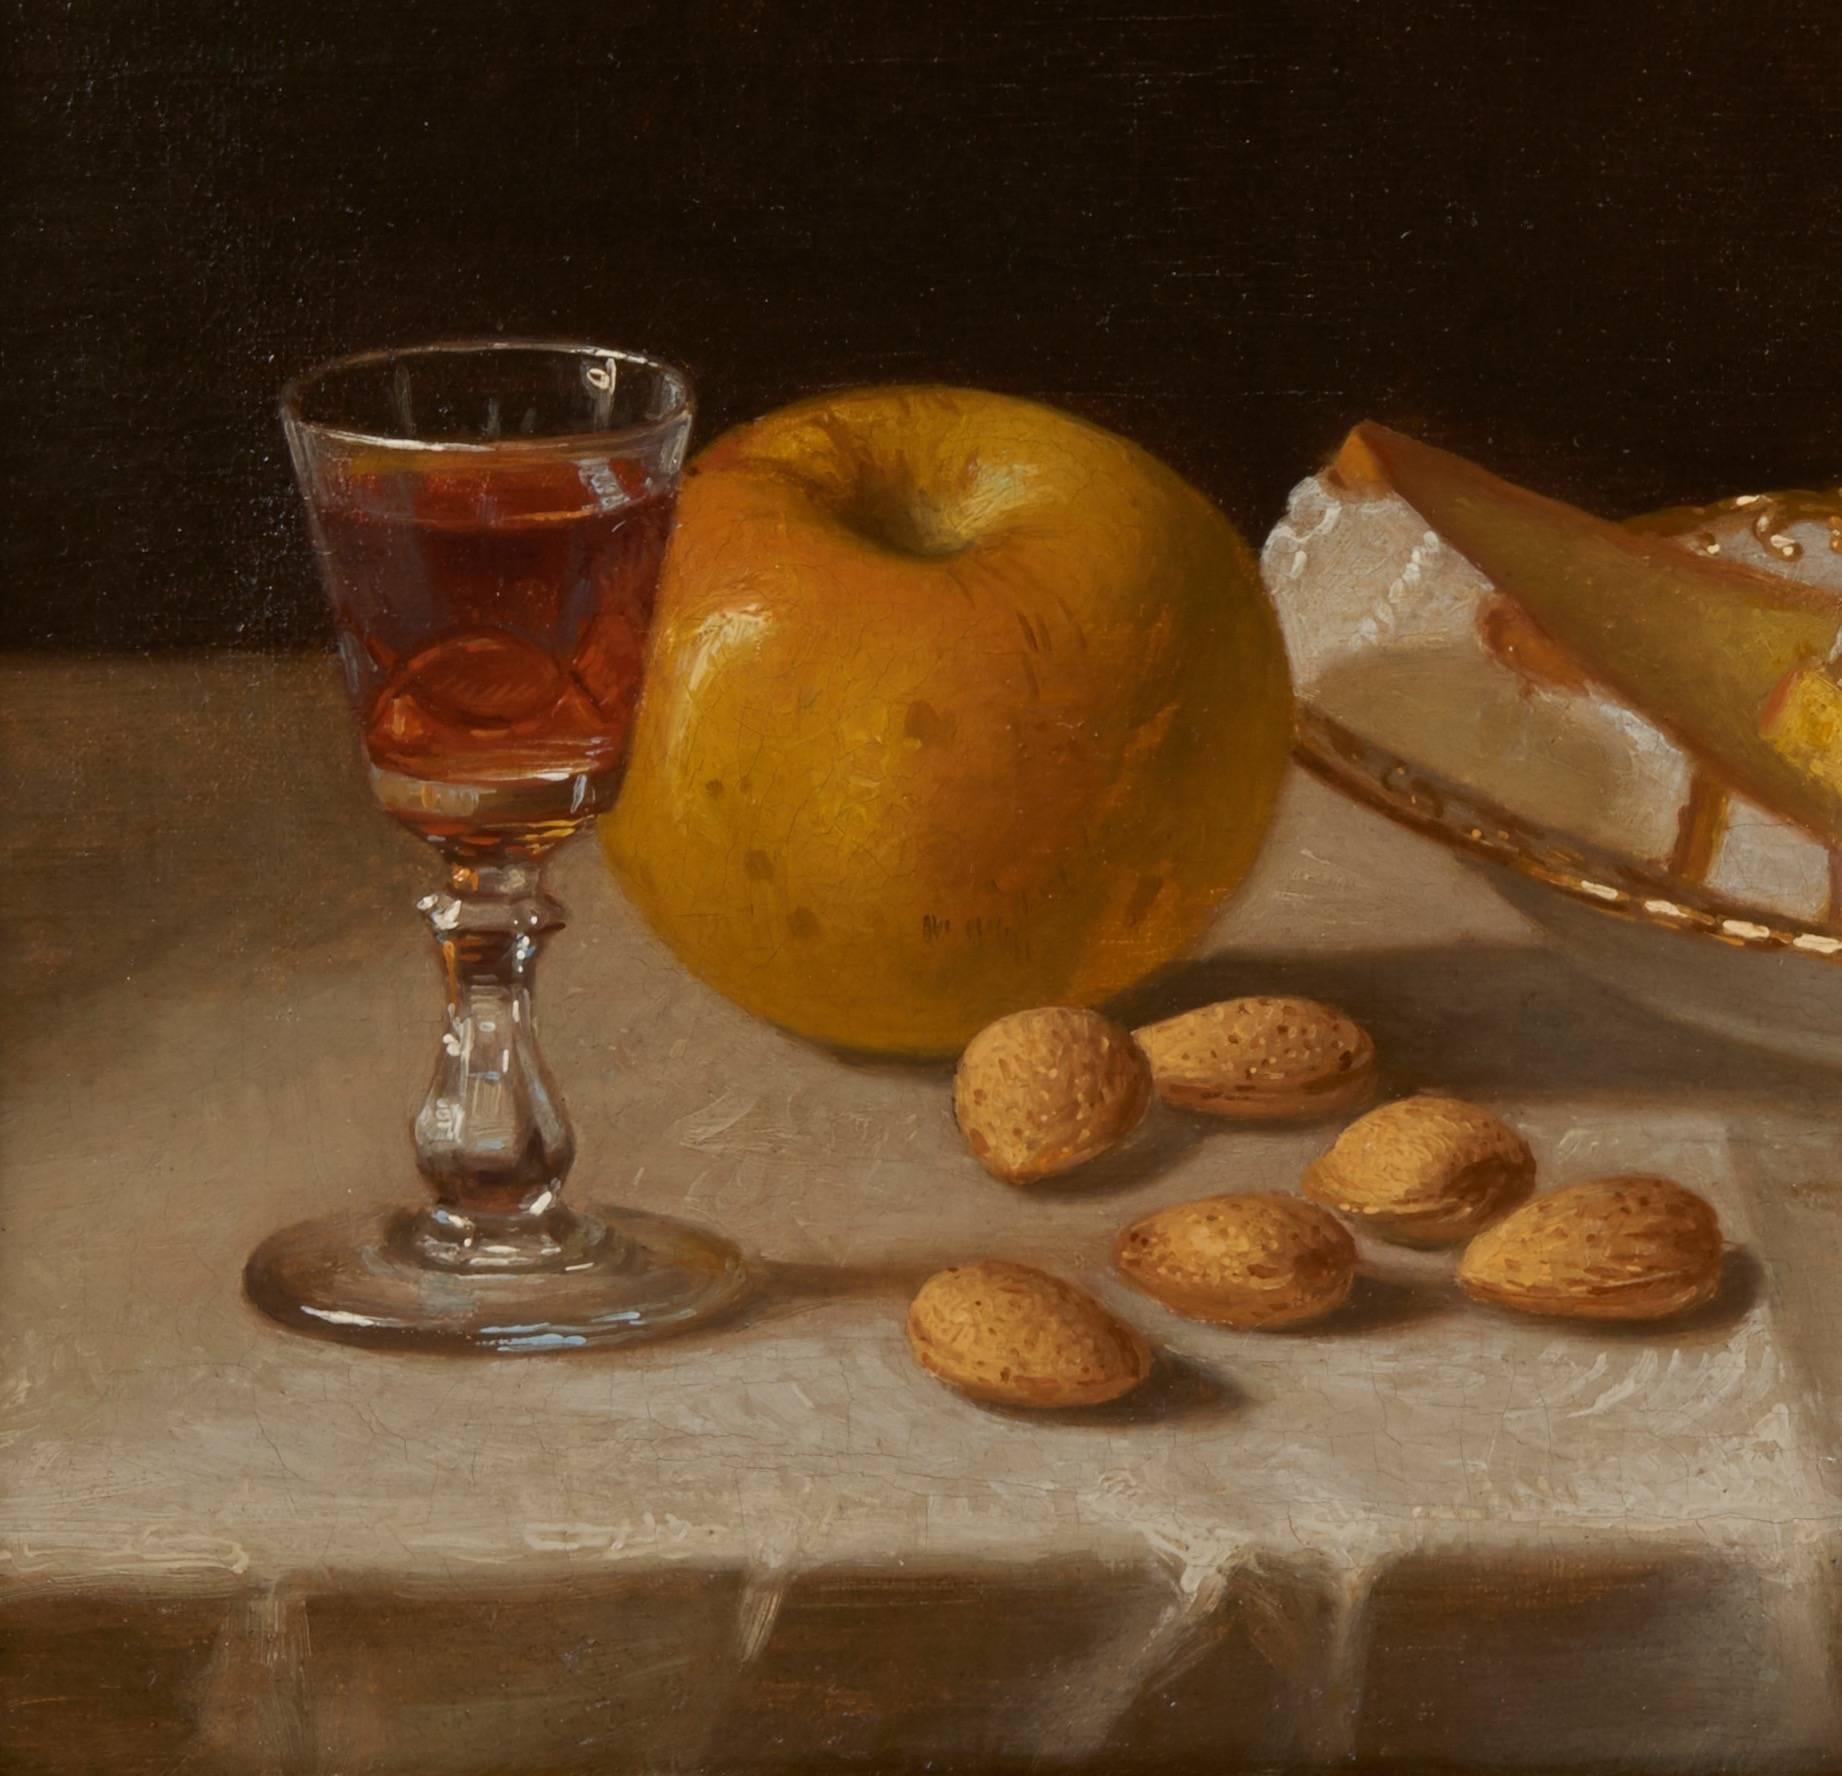 Signed J F Francis; dated 1858
For John F. Francis 1808-1886
Philadelphia

John Francis was a Philadelphia painter, primarily known as the leading painter of luncheon and dessert still life in an intricate and painterly style. He exhibited at